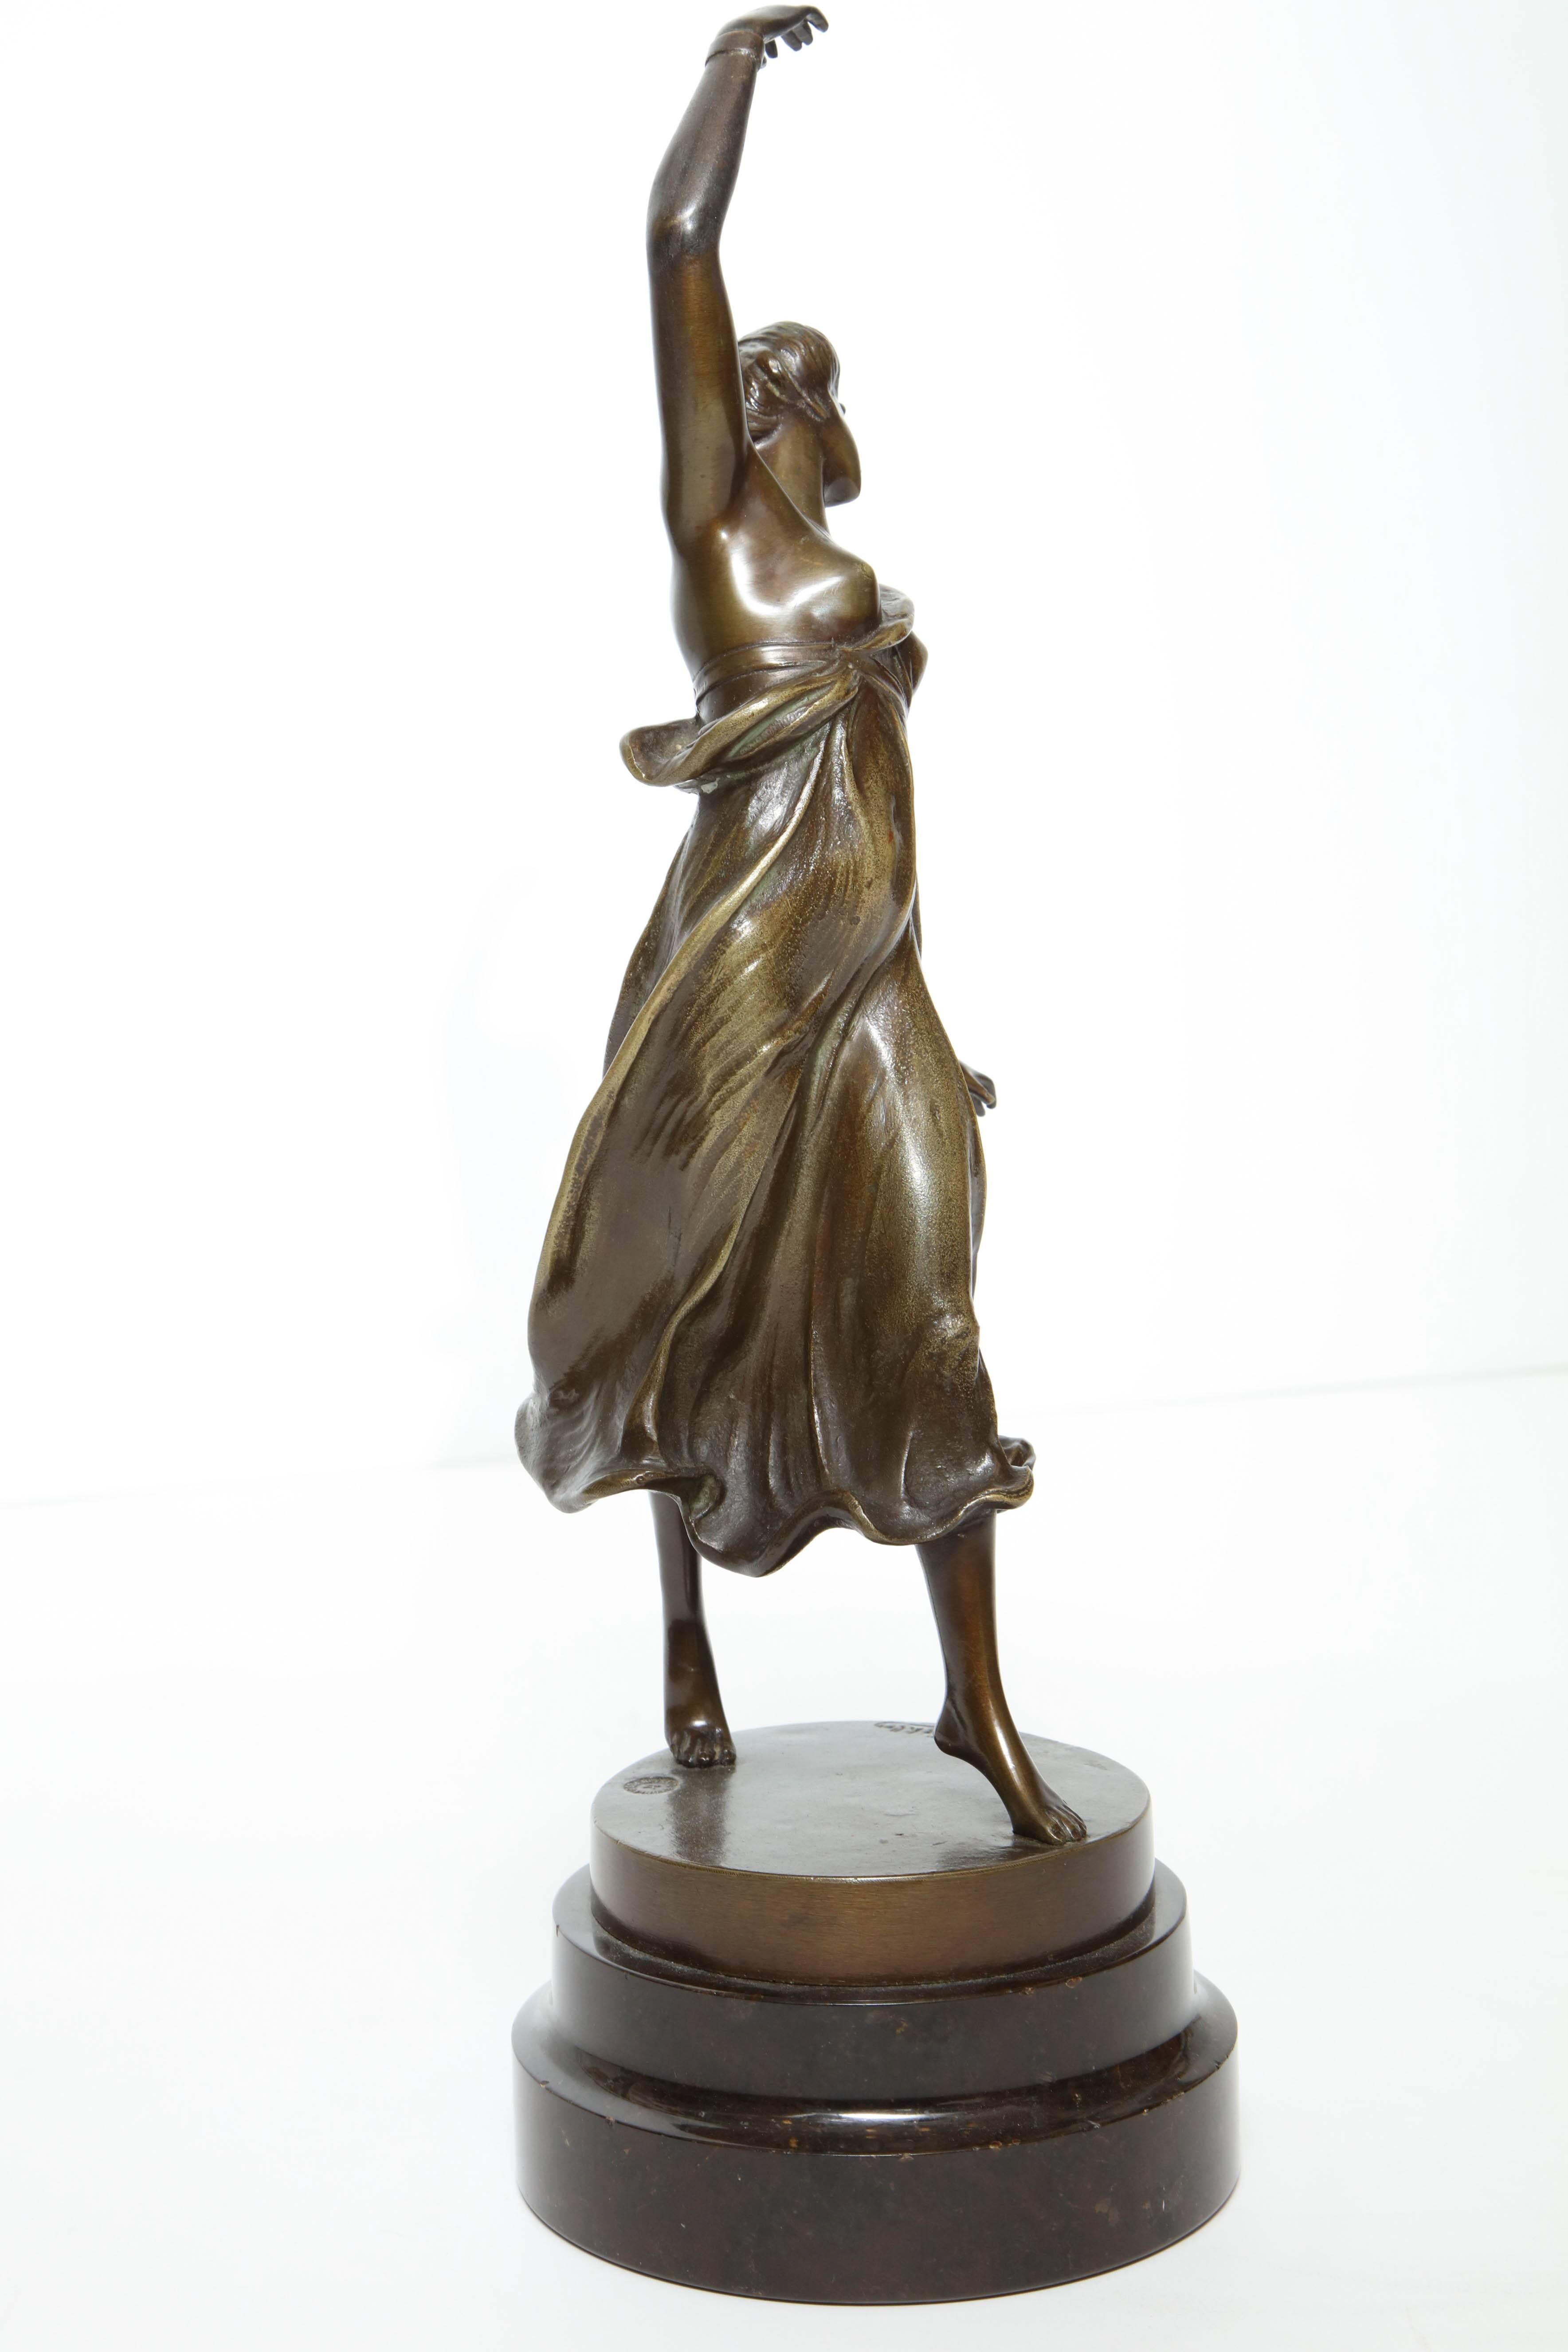 Cast Bronze of Dancing Woman with Raised Arm by Rudolf Kuchker